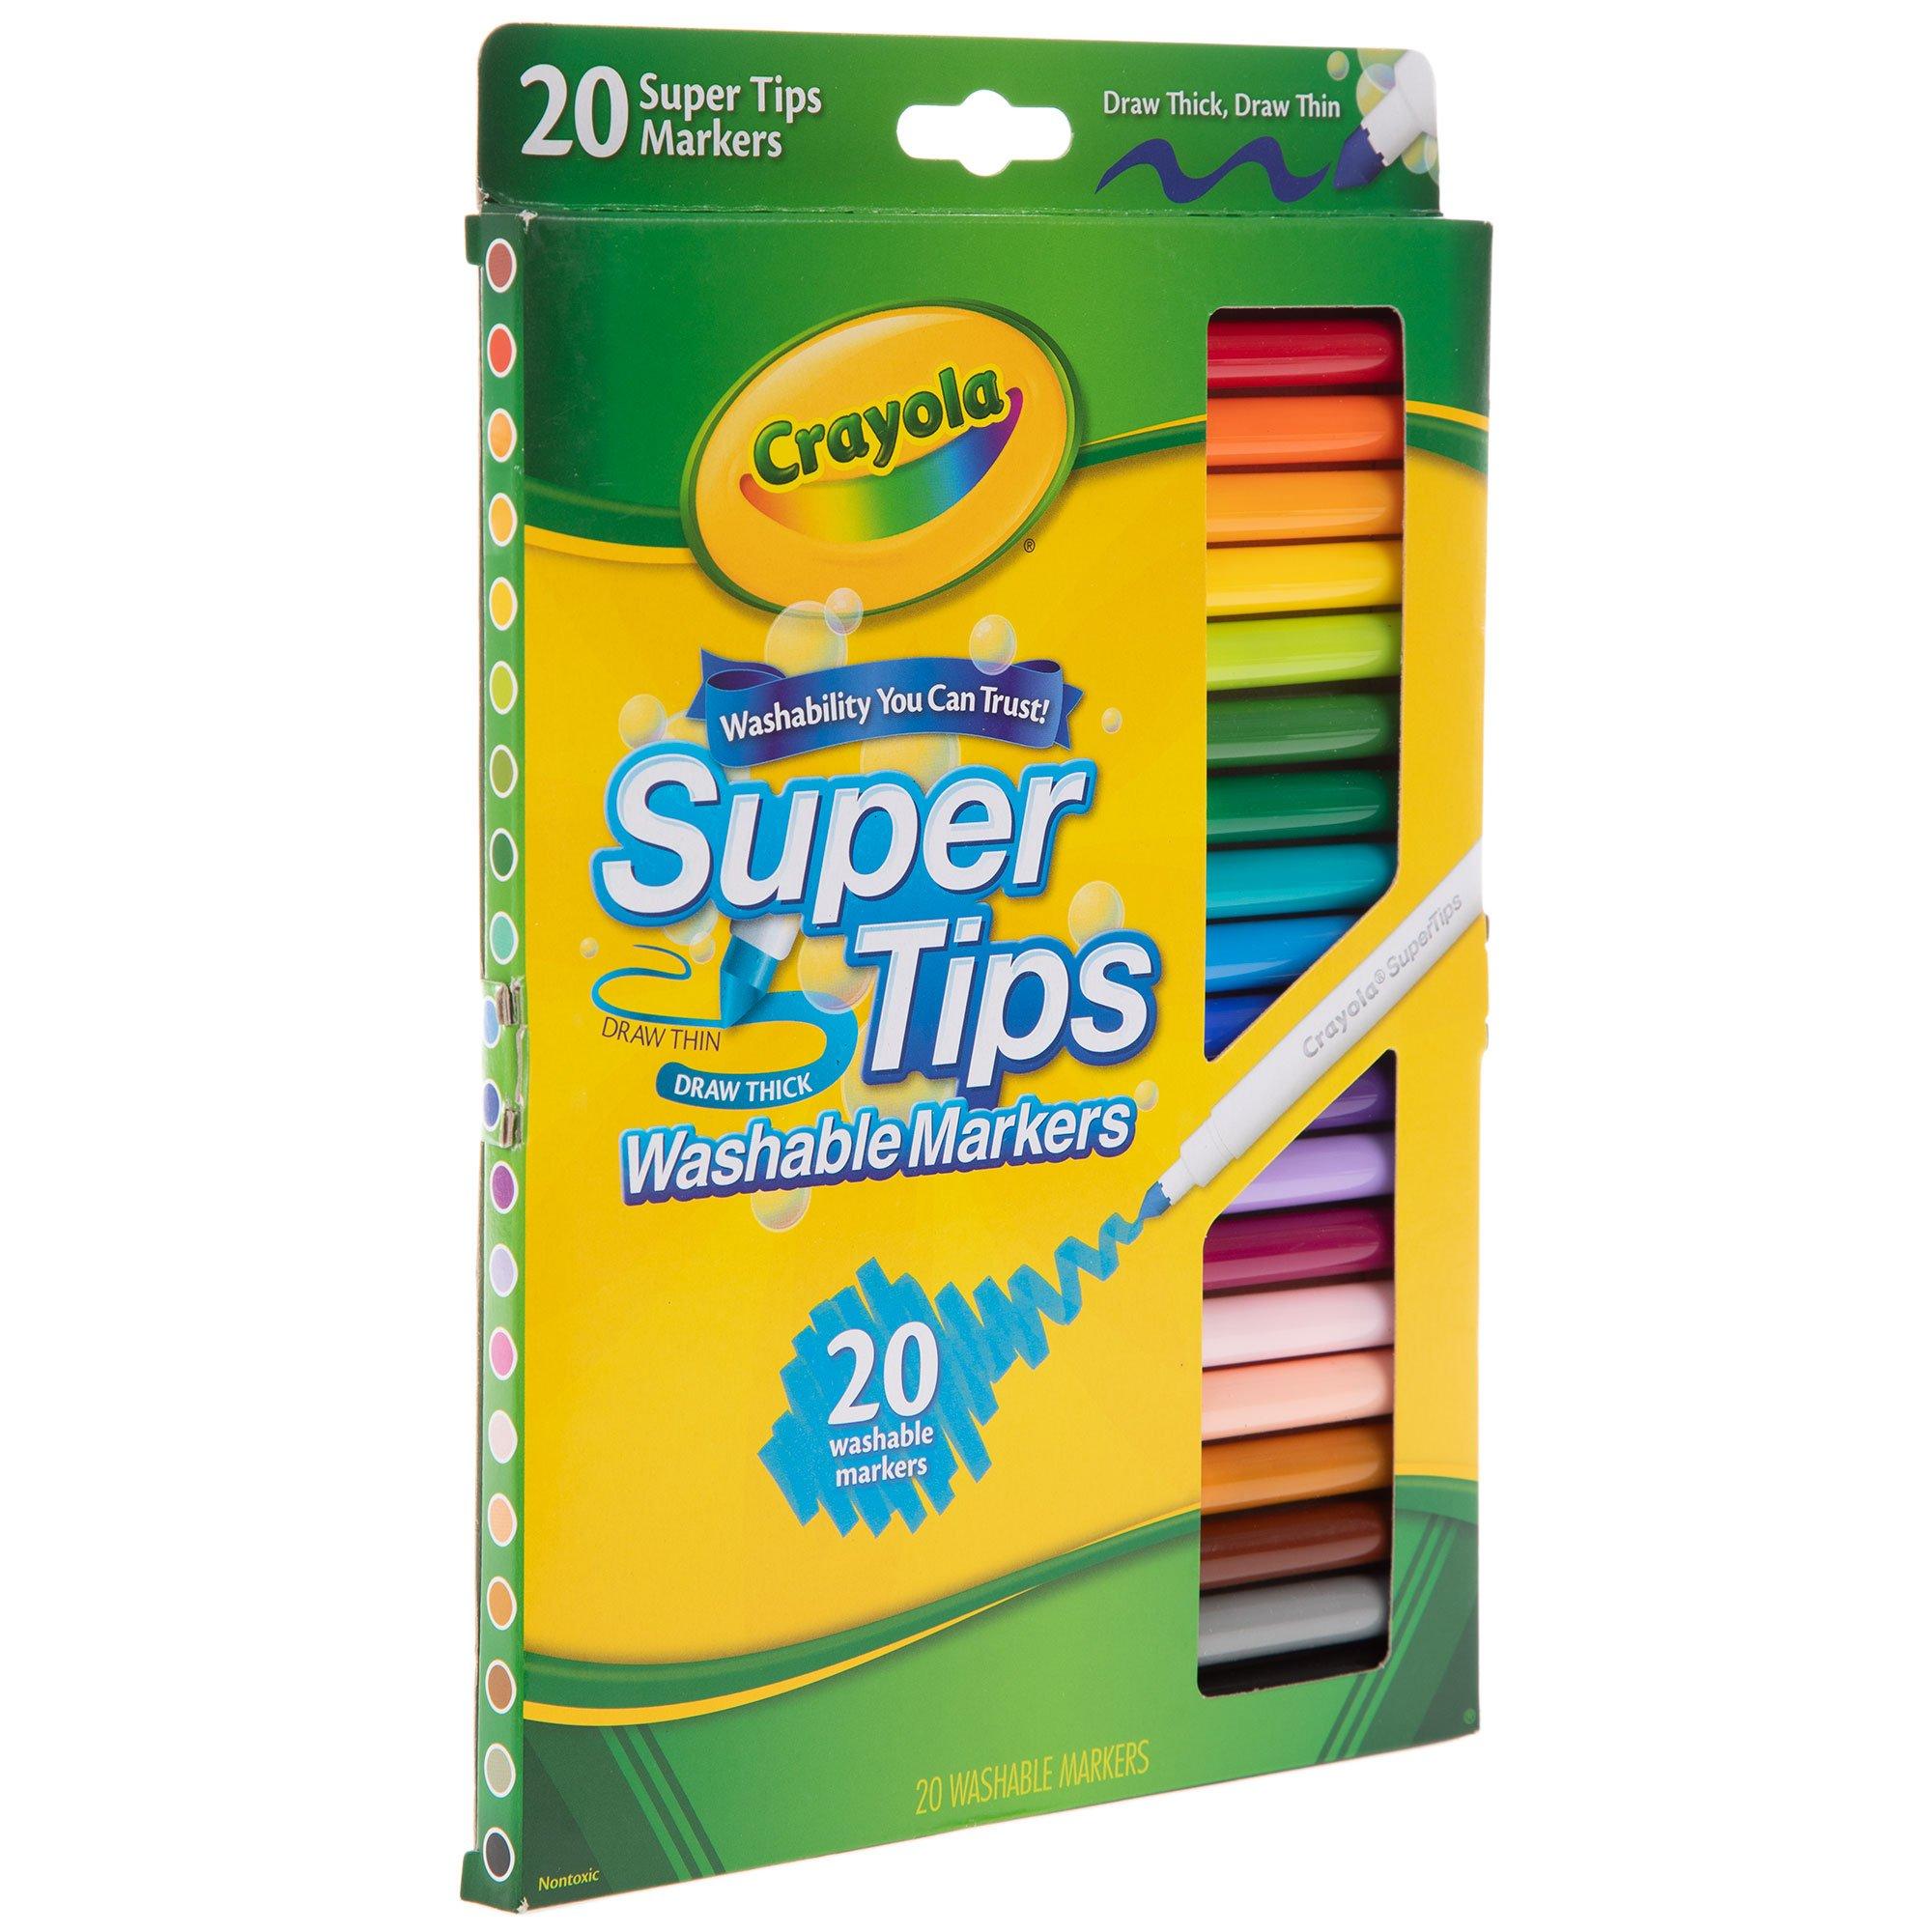 Shuttle Art 384 Pack Washable Super Tips Markers, 16 Assorted Colors  Conical Tip Large Markers Bulk with a Box, Bonus Caps, Home Classroom  School